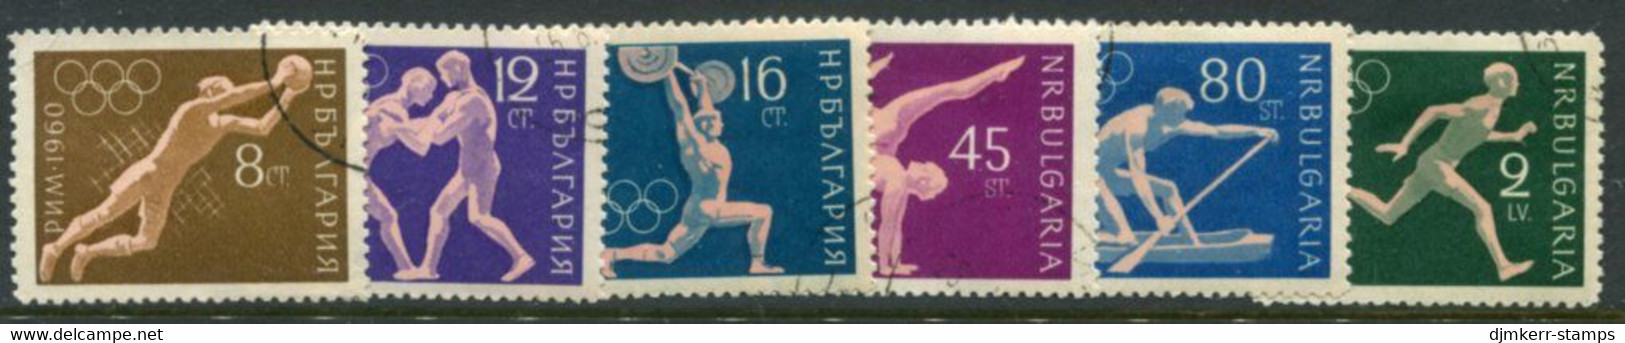 BULGARIA 1960 Olympic Games Perforated Used.  Michel 1172-77 - Usati